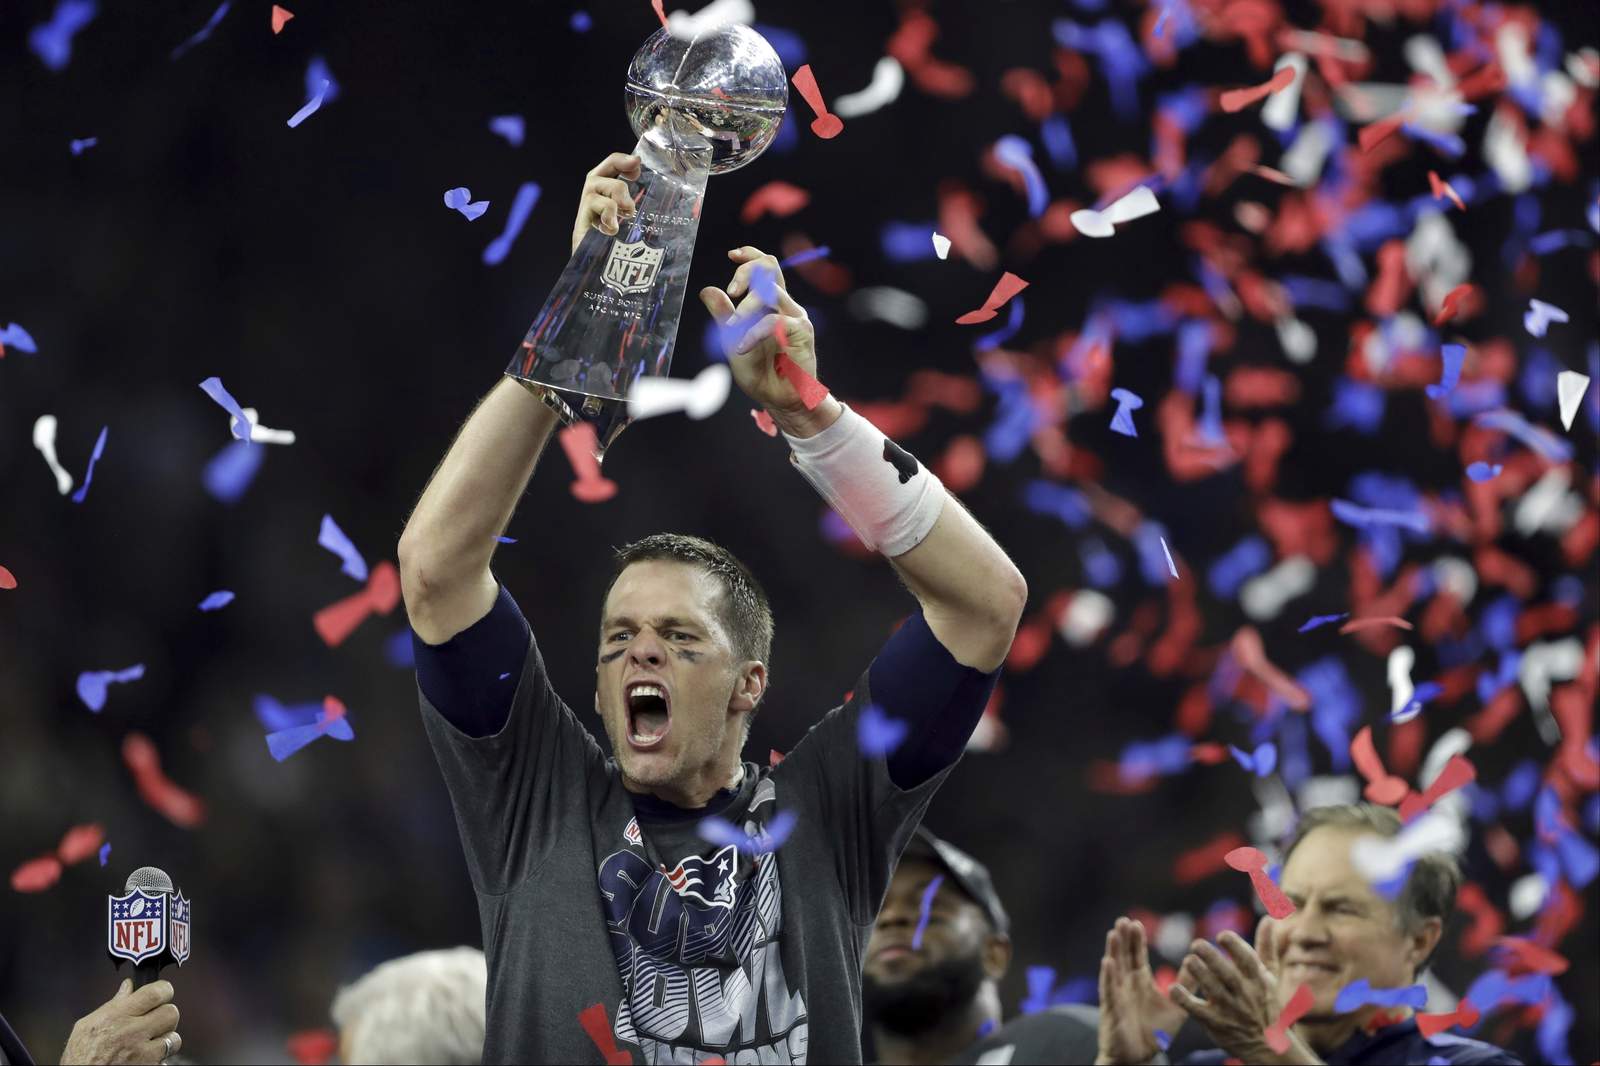 Brady's Super Bowl journeys to be part of 2021 ESPN series